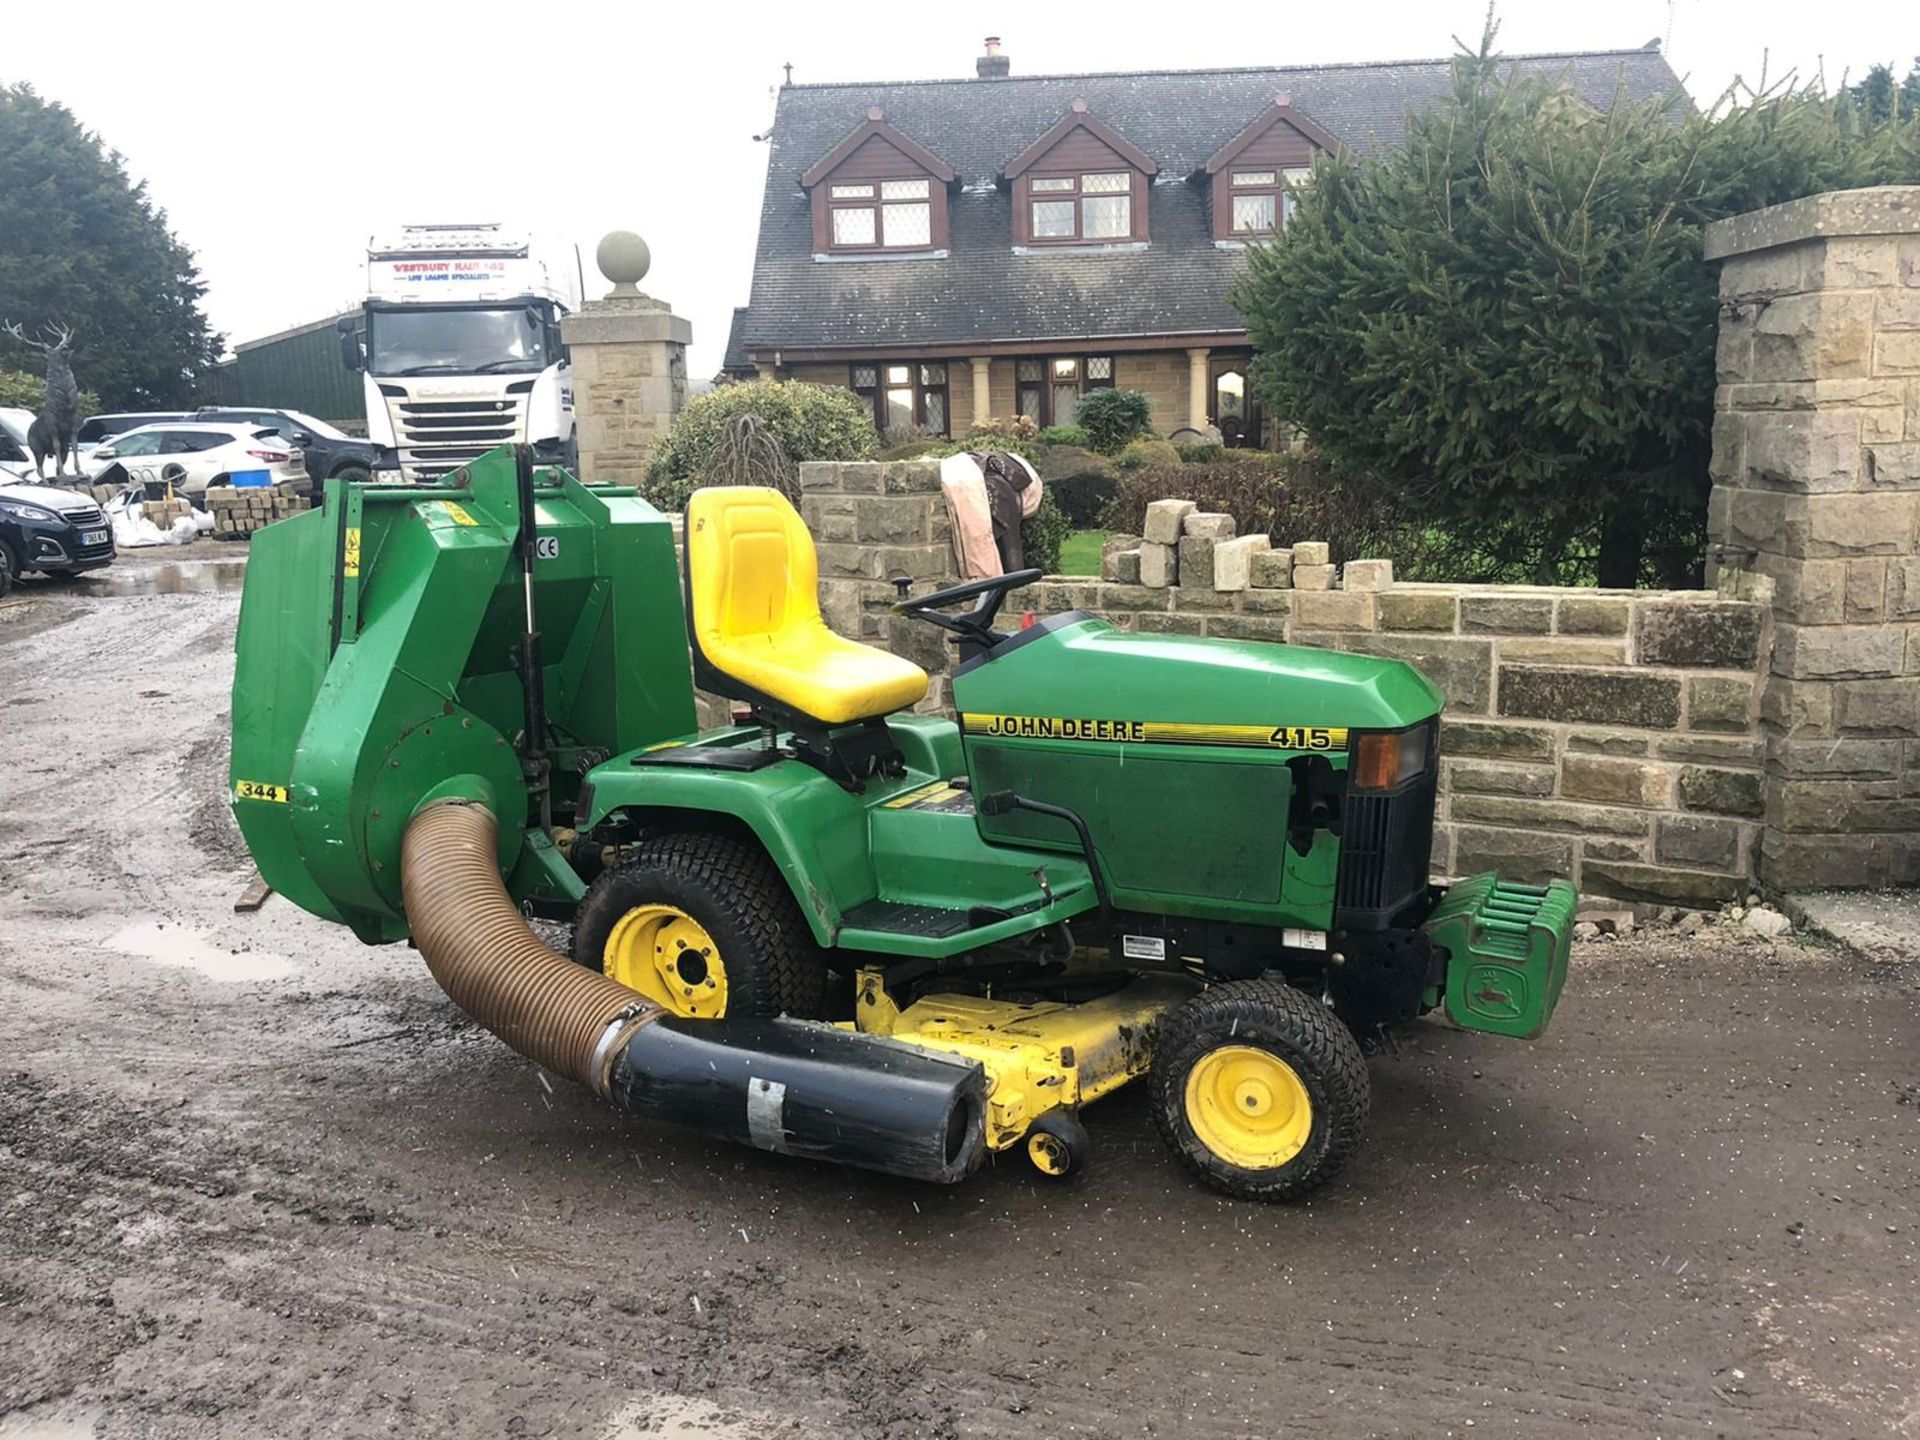 JOHN DEERE 415 RIDE ON LAWN MOWER, RUNS & WORKS, CUTS AND COLLECTS WELL *NO VAT*